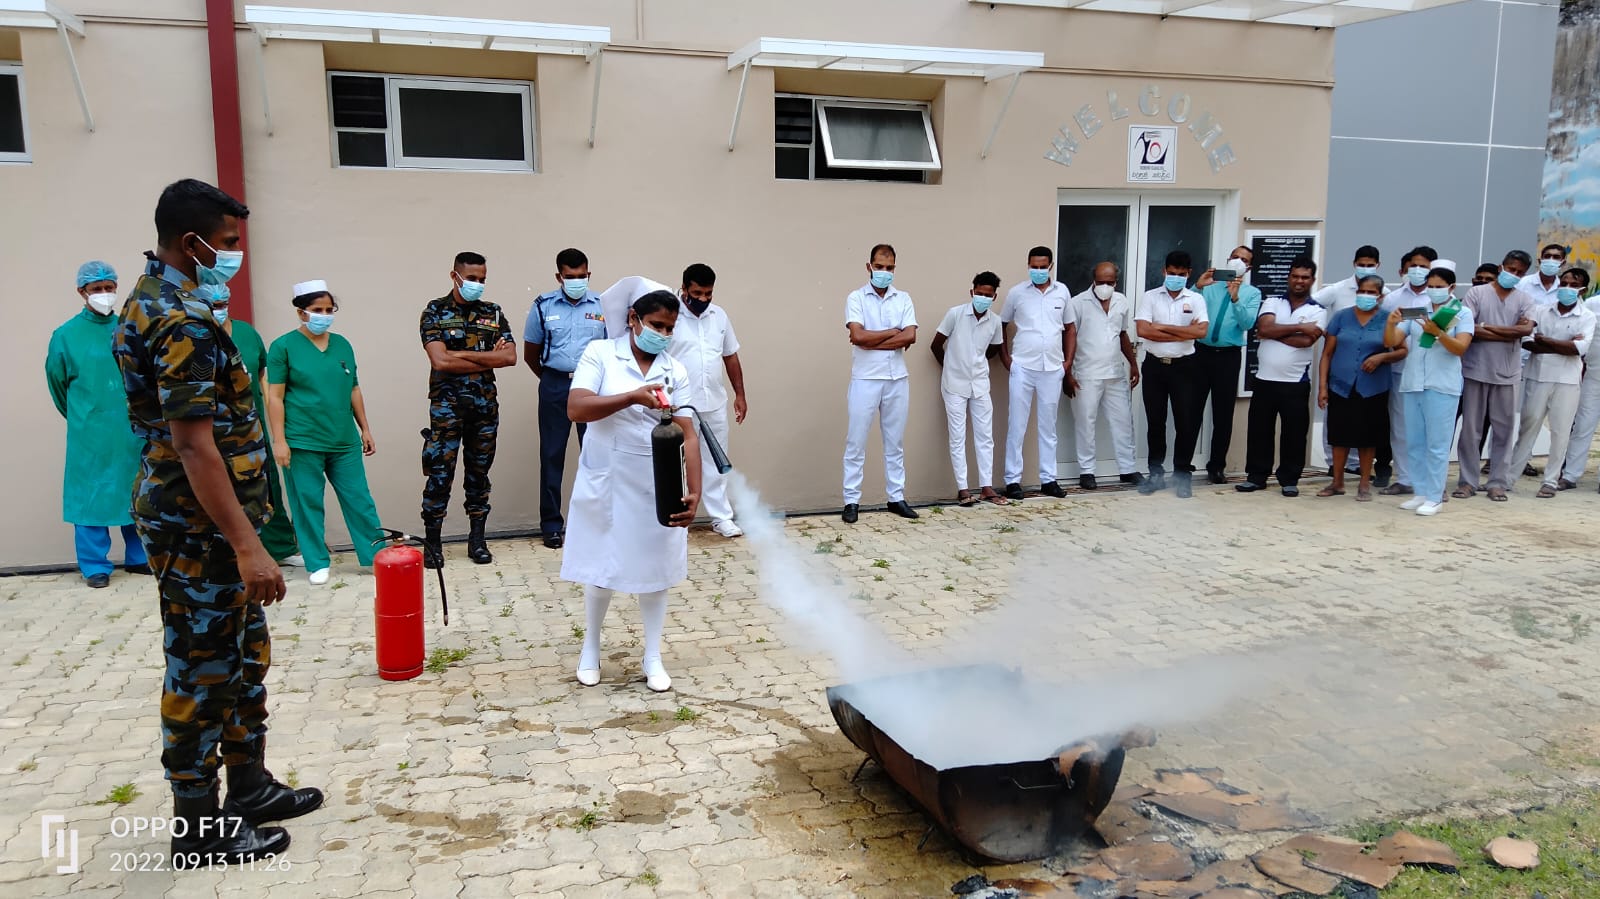 Fire fighting programme Tangalle hospital 2022-09-13 7